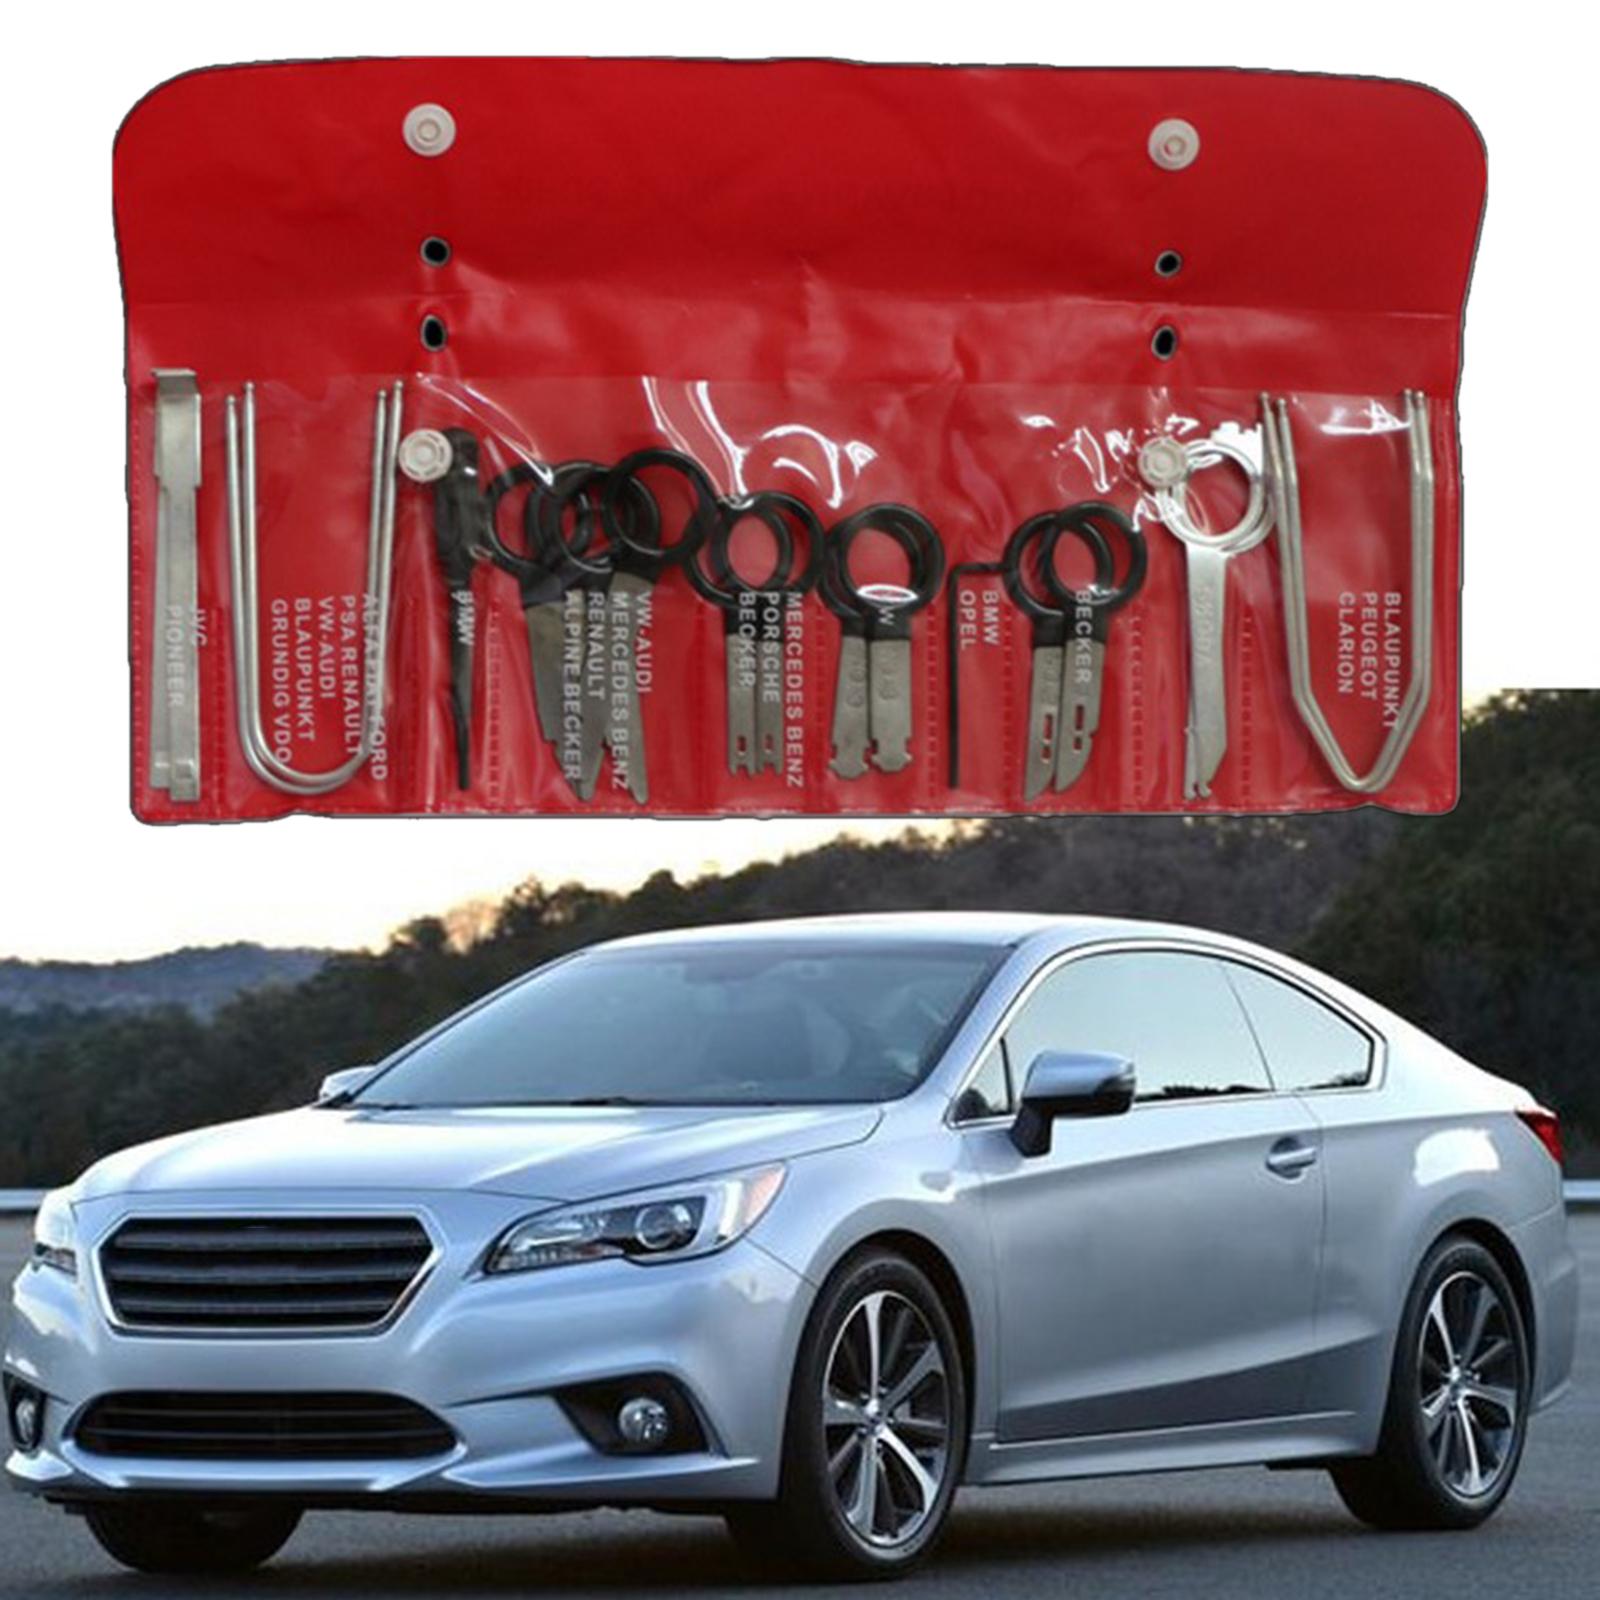 20x Car Audio Radio Removal Tool Kit Release Key Universal Fit for BMW Red 